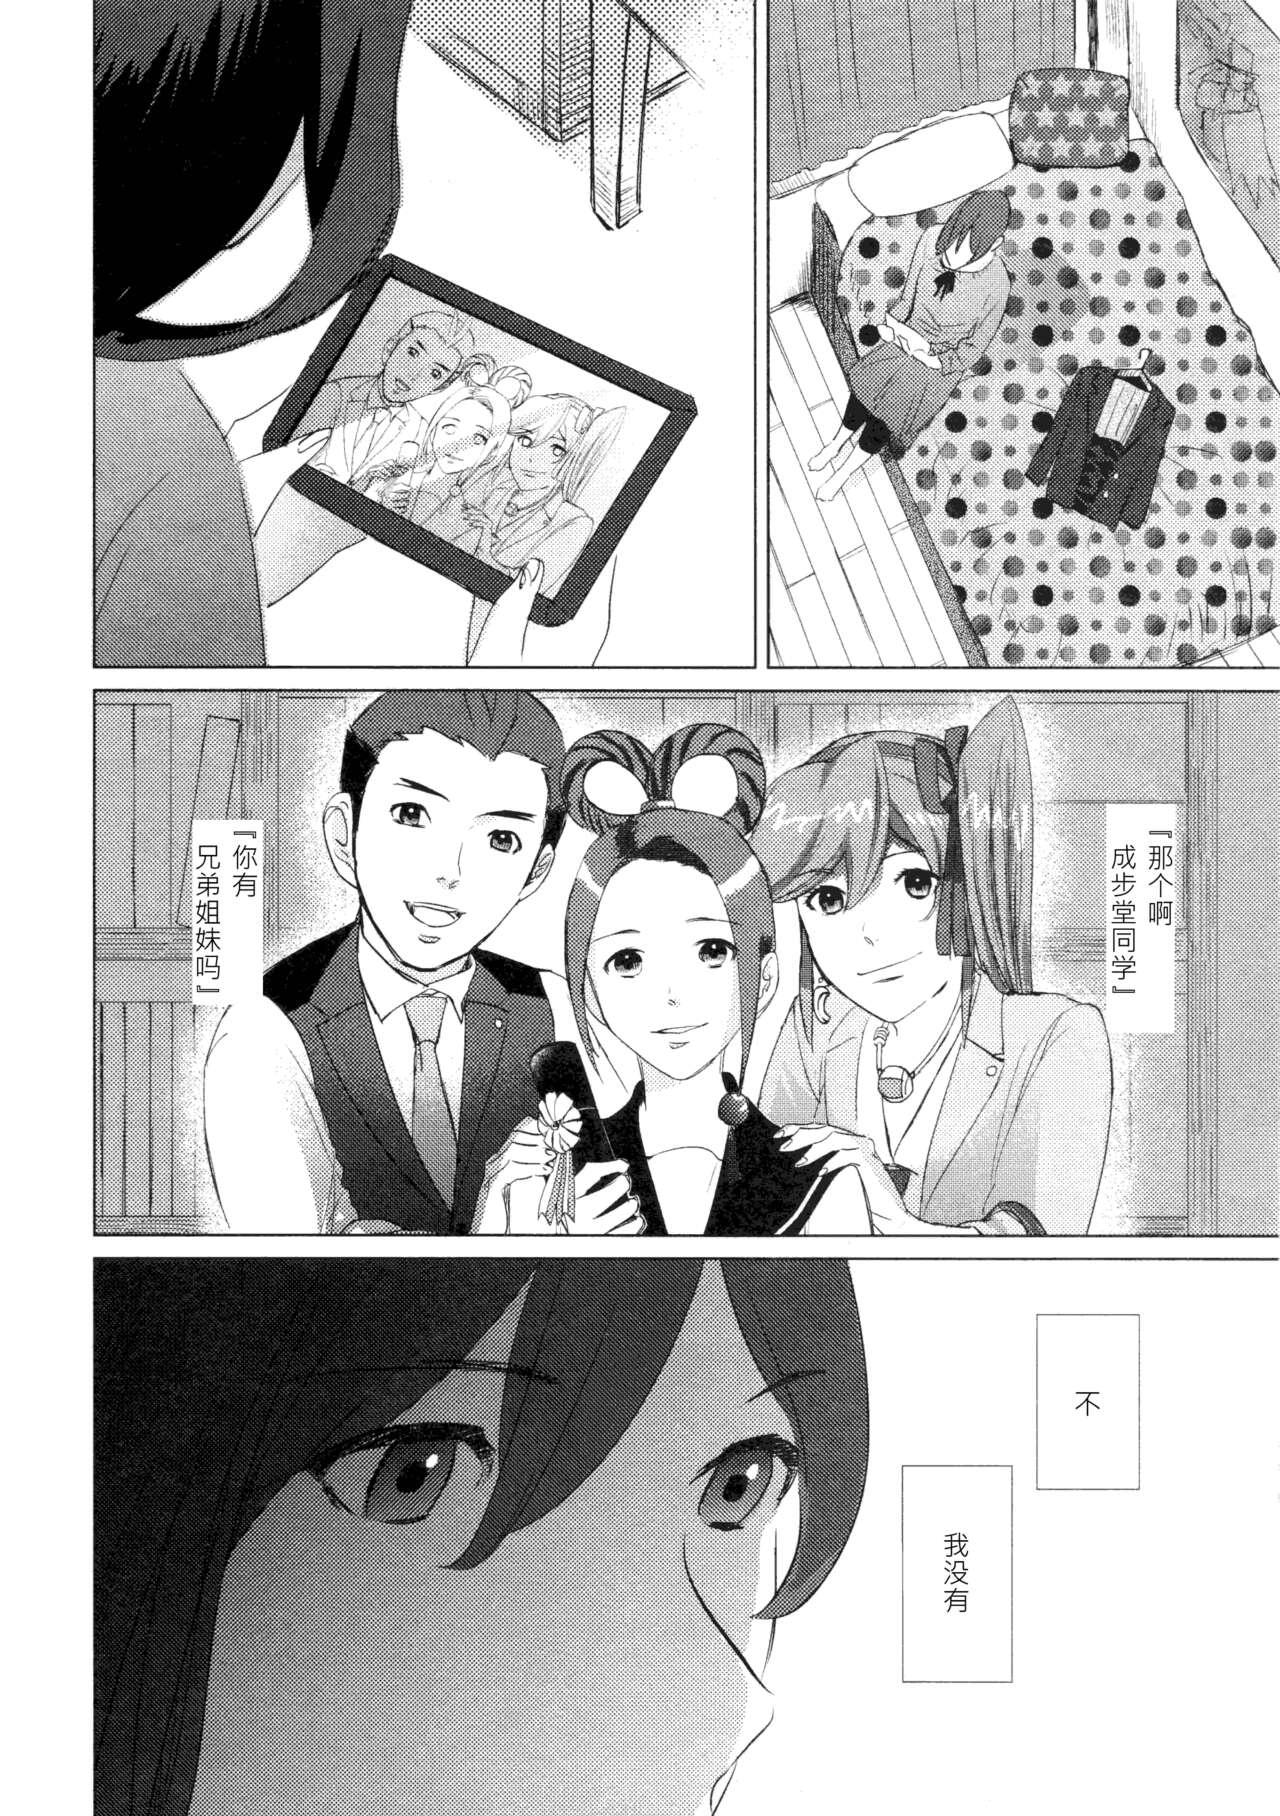 Dutch Don't leave me alone,my big LITTLE brother - Ace attorney | gyakuten saiban Asian Babes - Page 9